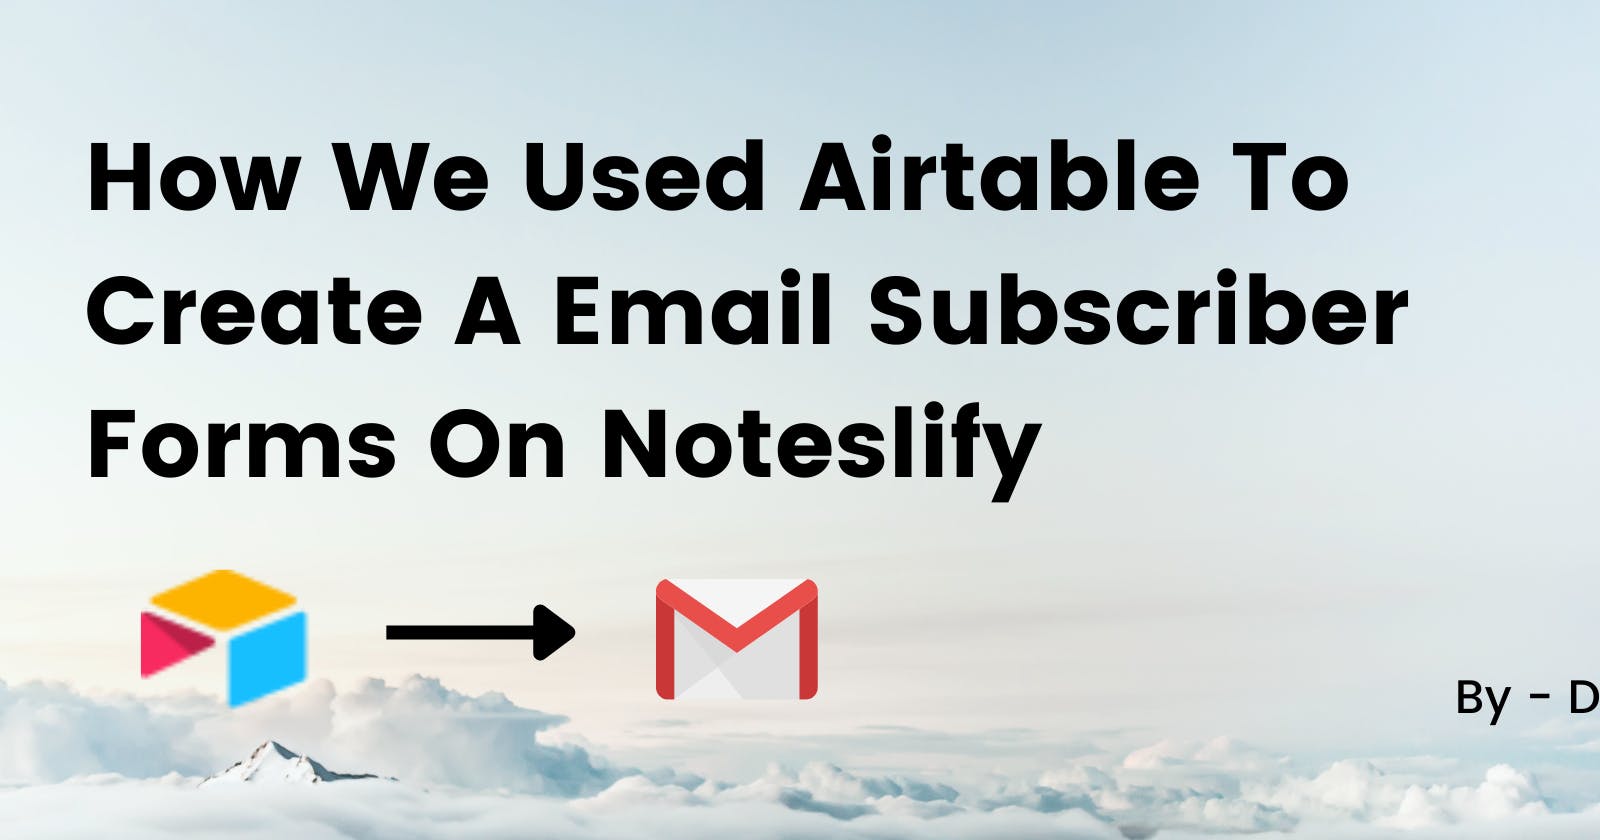 How We Used Airtable To Create An Email Subscriber Form On Noteslify For $0!!!